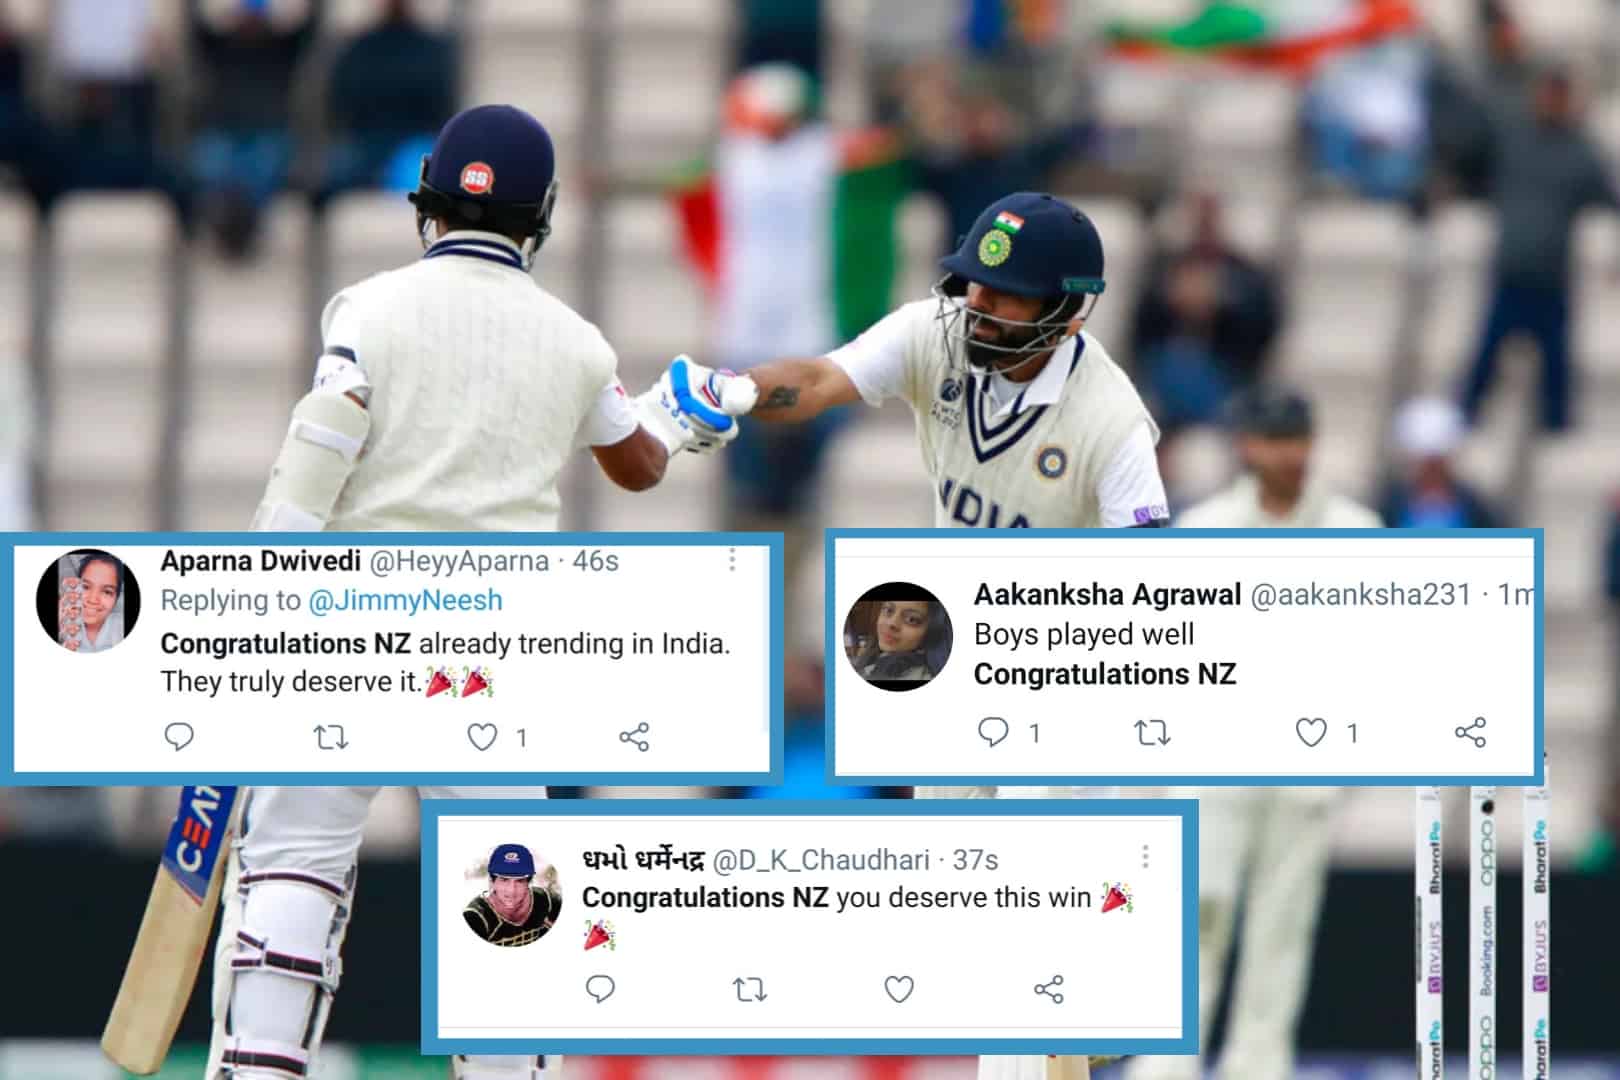 WTC Final: Twitter Users Started Trending "Congratulations New Zealand" Before Match Result